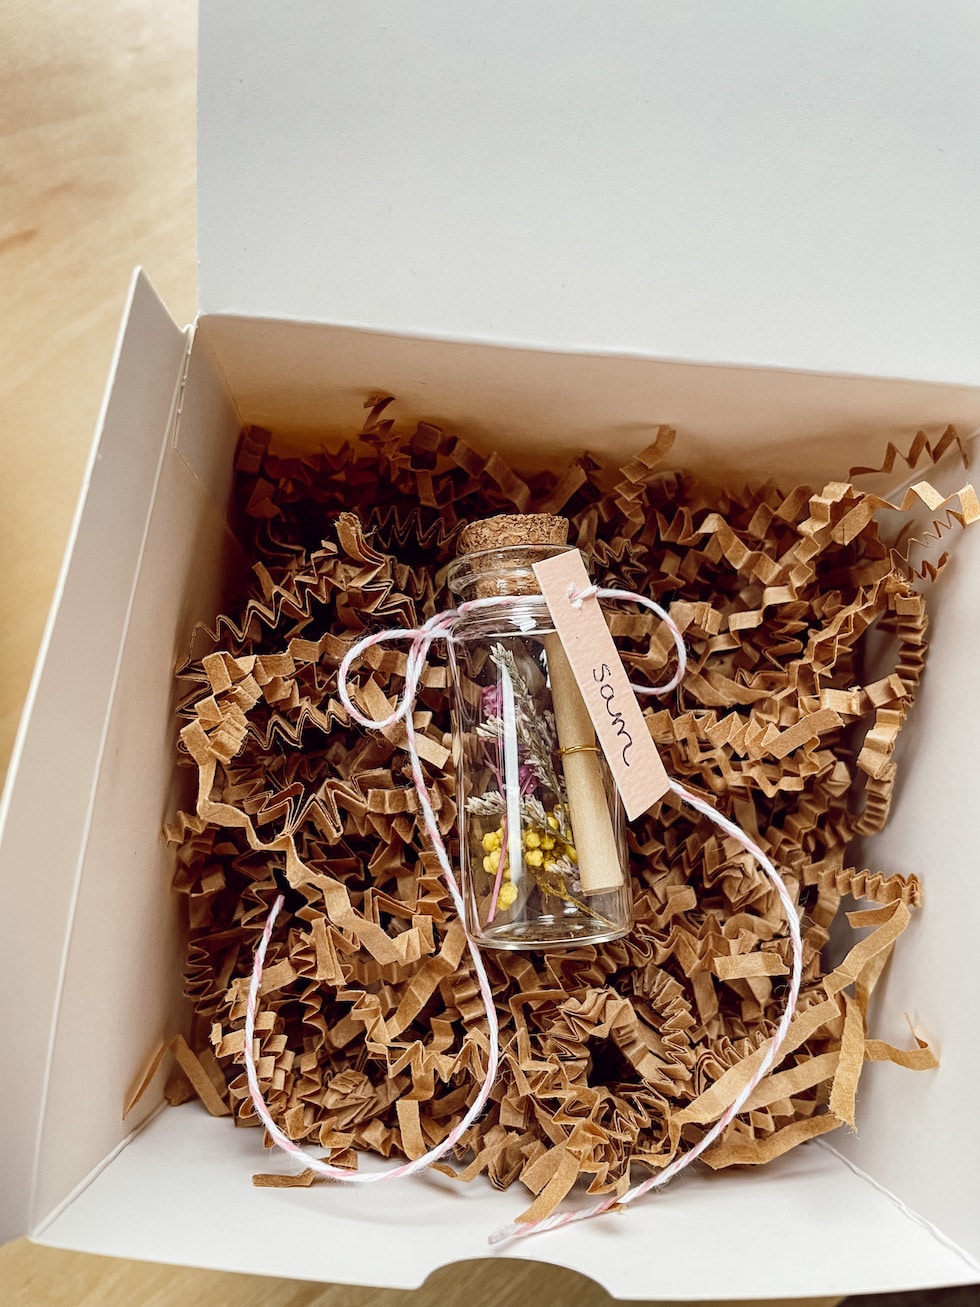 DIY Wedding: Mini Messages in a Bottle for Bridesmaids, Gifts + Place Setting